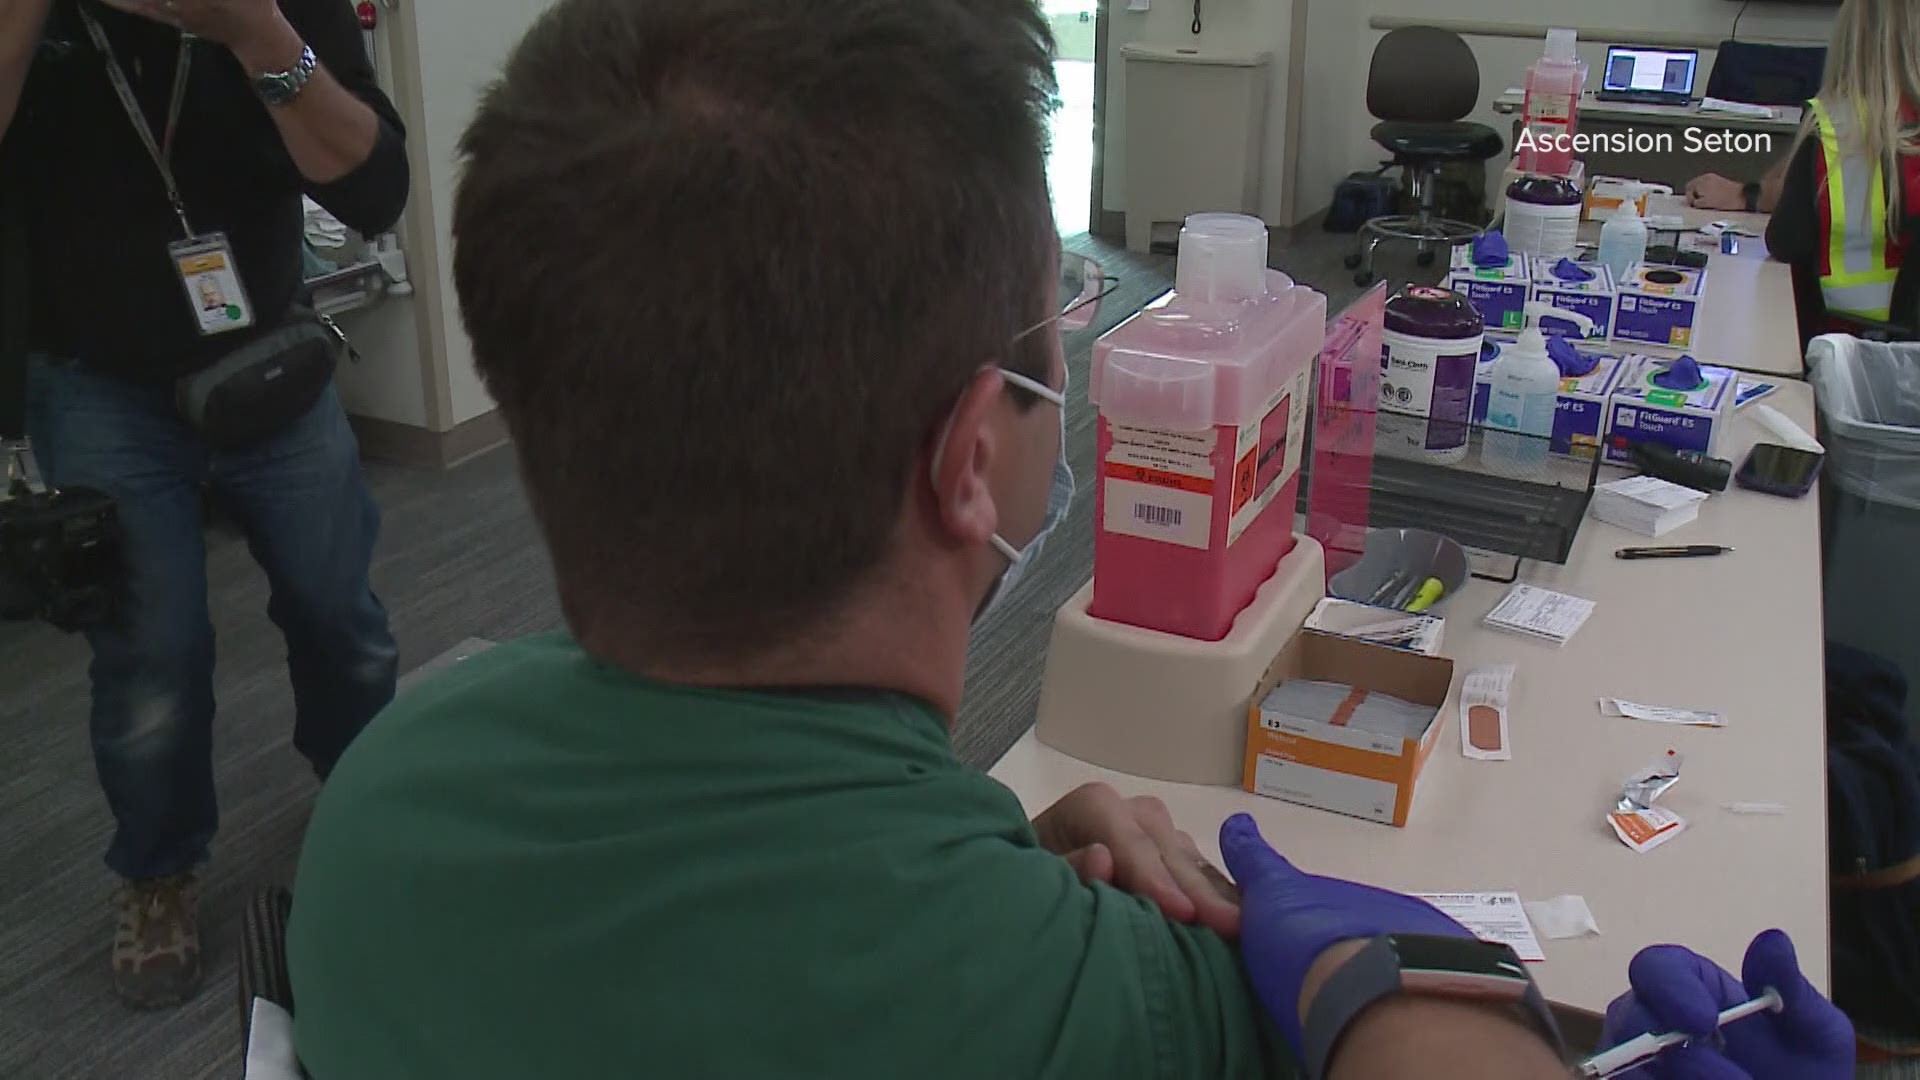 More rural hospitals in Texas are getting the COVID-19 vaccine. But others are still struggling to get access.